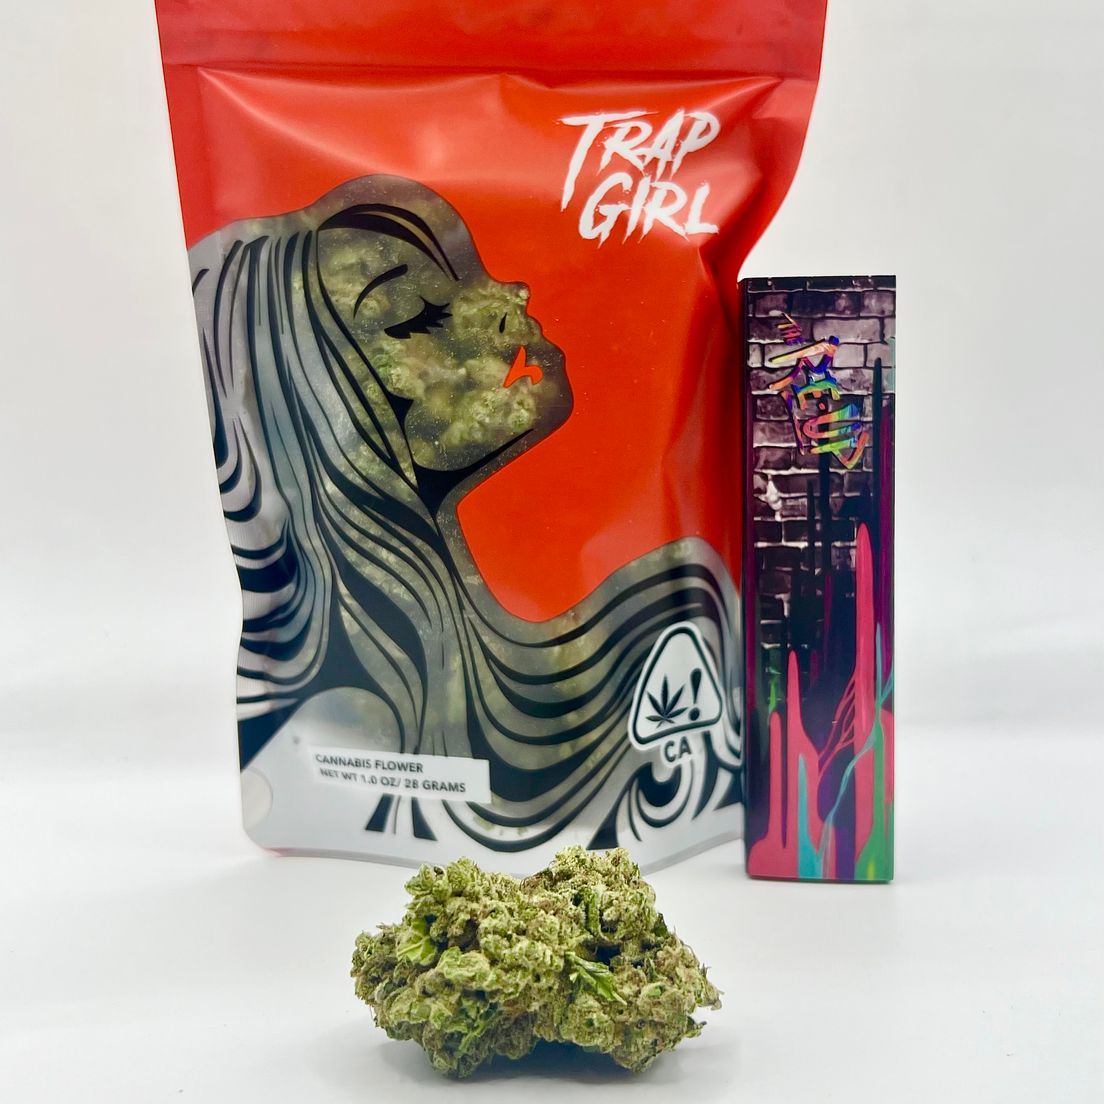 *Deal! $79 1 oz. Rainbow Sherbert (27.61%/Hybrid) - Trap Girl + Rolling Papers *Disclaimer*